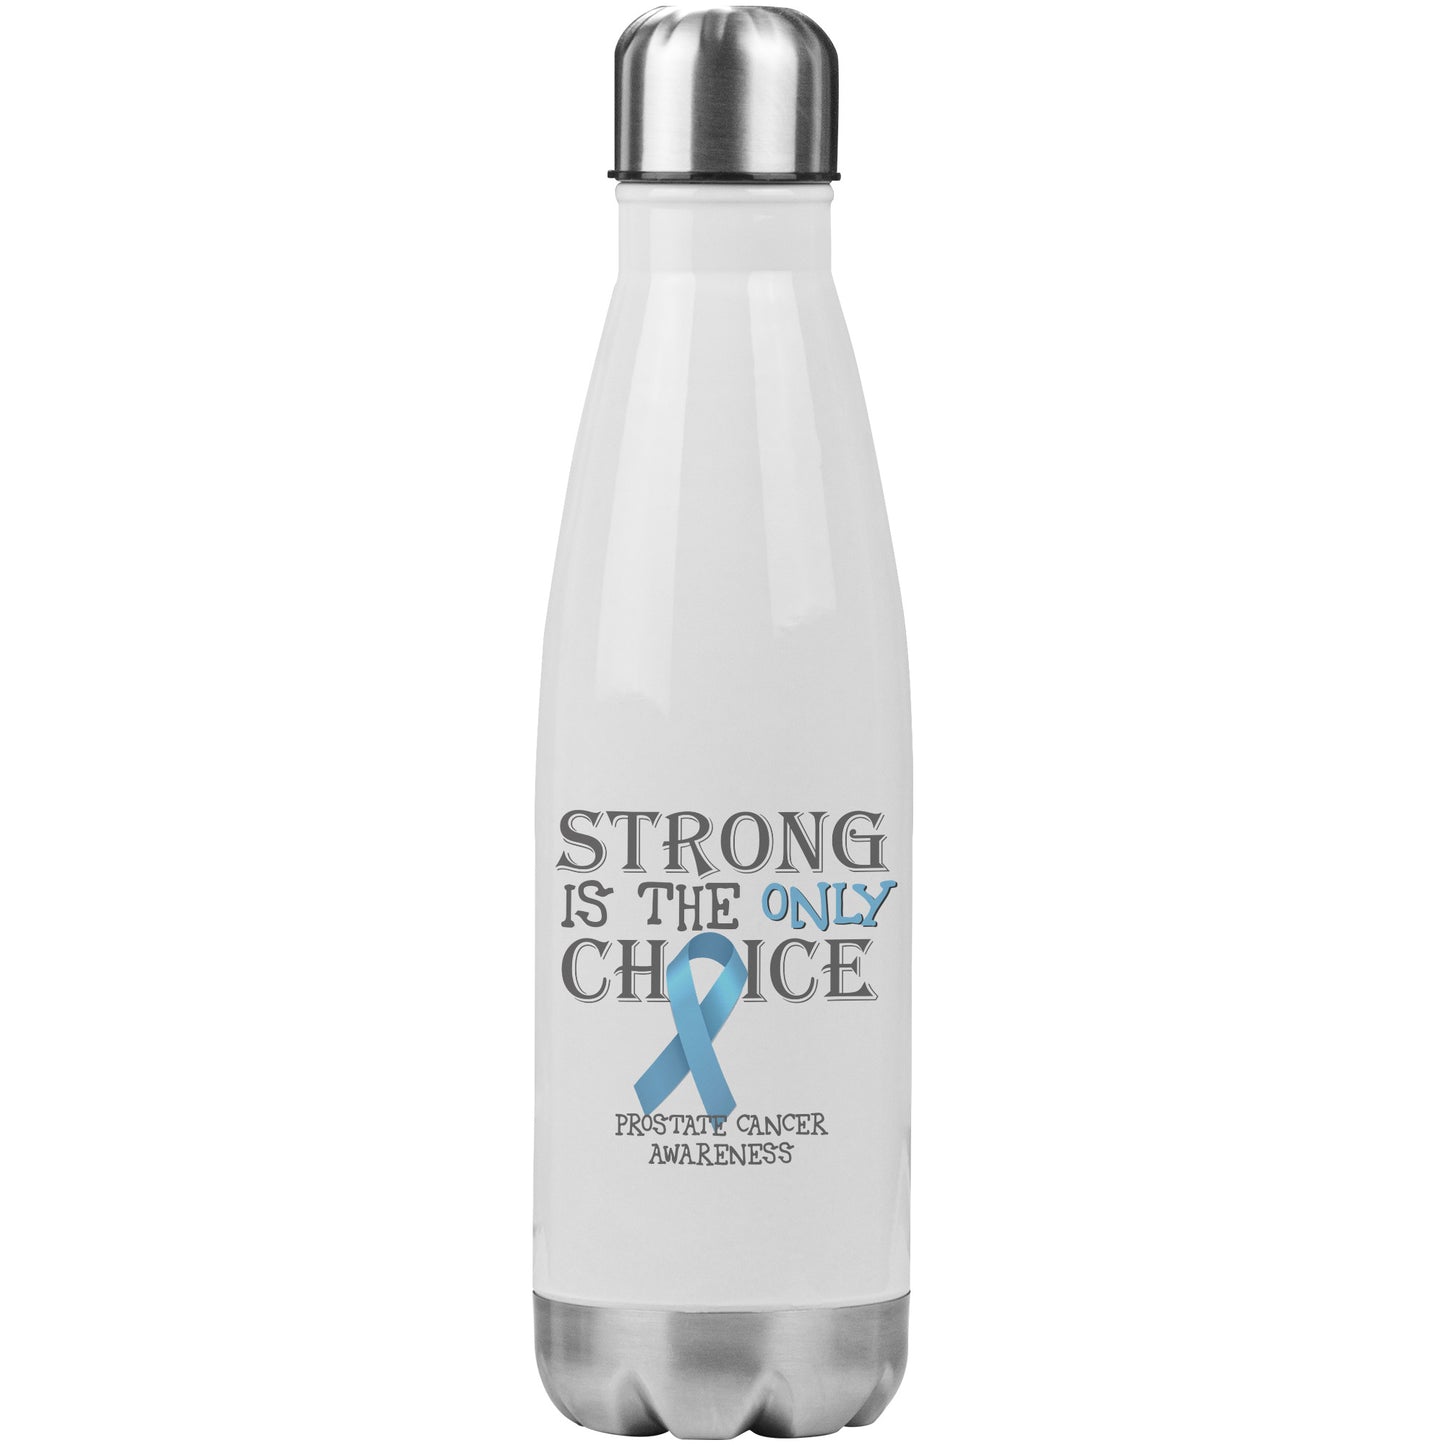 Strong is the Only Choice -Prostate Cancer Awareness 20oz Insulated Water Bottle